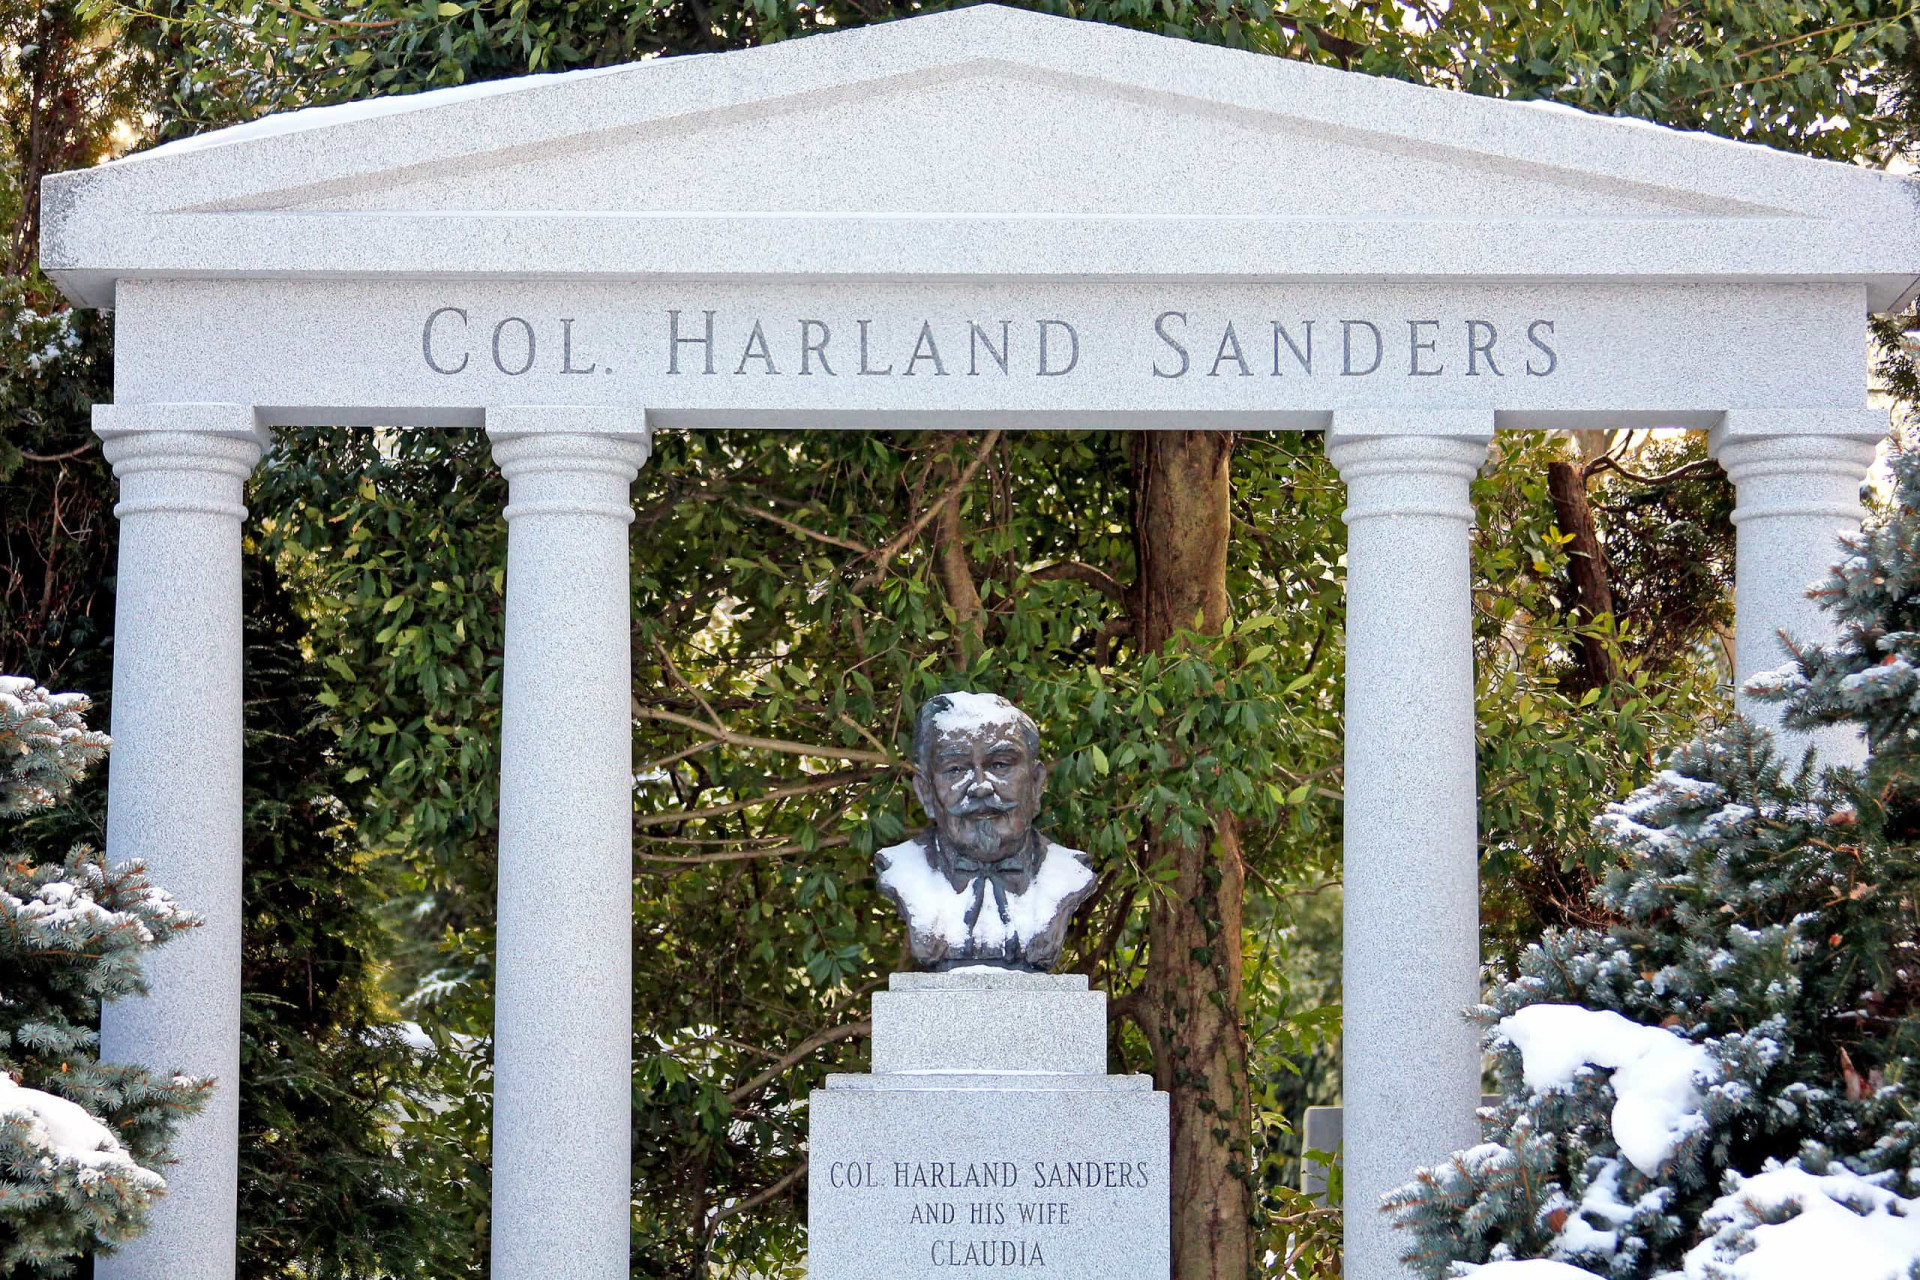 <p>Harland Sanders (1890–1980) gave us KFC, one of the most successful fast-food restaurants on the planet. As one of Kentucky's favorite sons, the "Colonel" upon his death was honored with his own tomb, located in Cave Hill Cemetery.</p><p>You may also like:<a href="https://www.starsinsider.com/n/339909?utm_source=msn.com&utm_medium=display&utm_campaign=referral_description&utm_content=198095v22en-en"> Too cool for school: celebs who never smile on the red carpet</a></p>